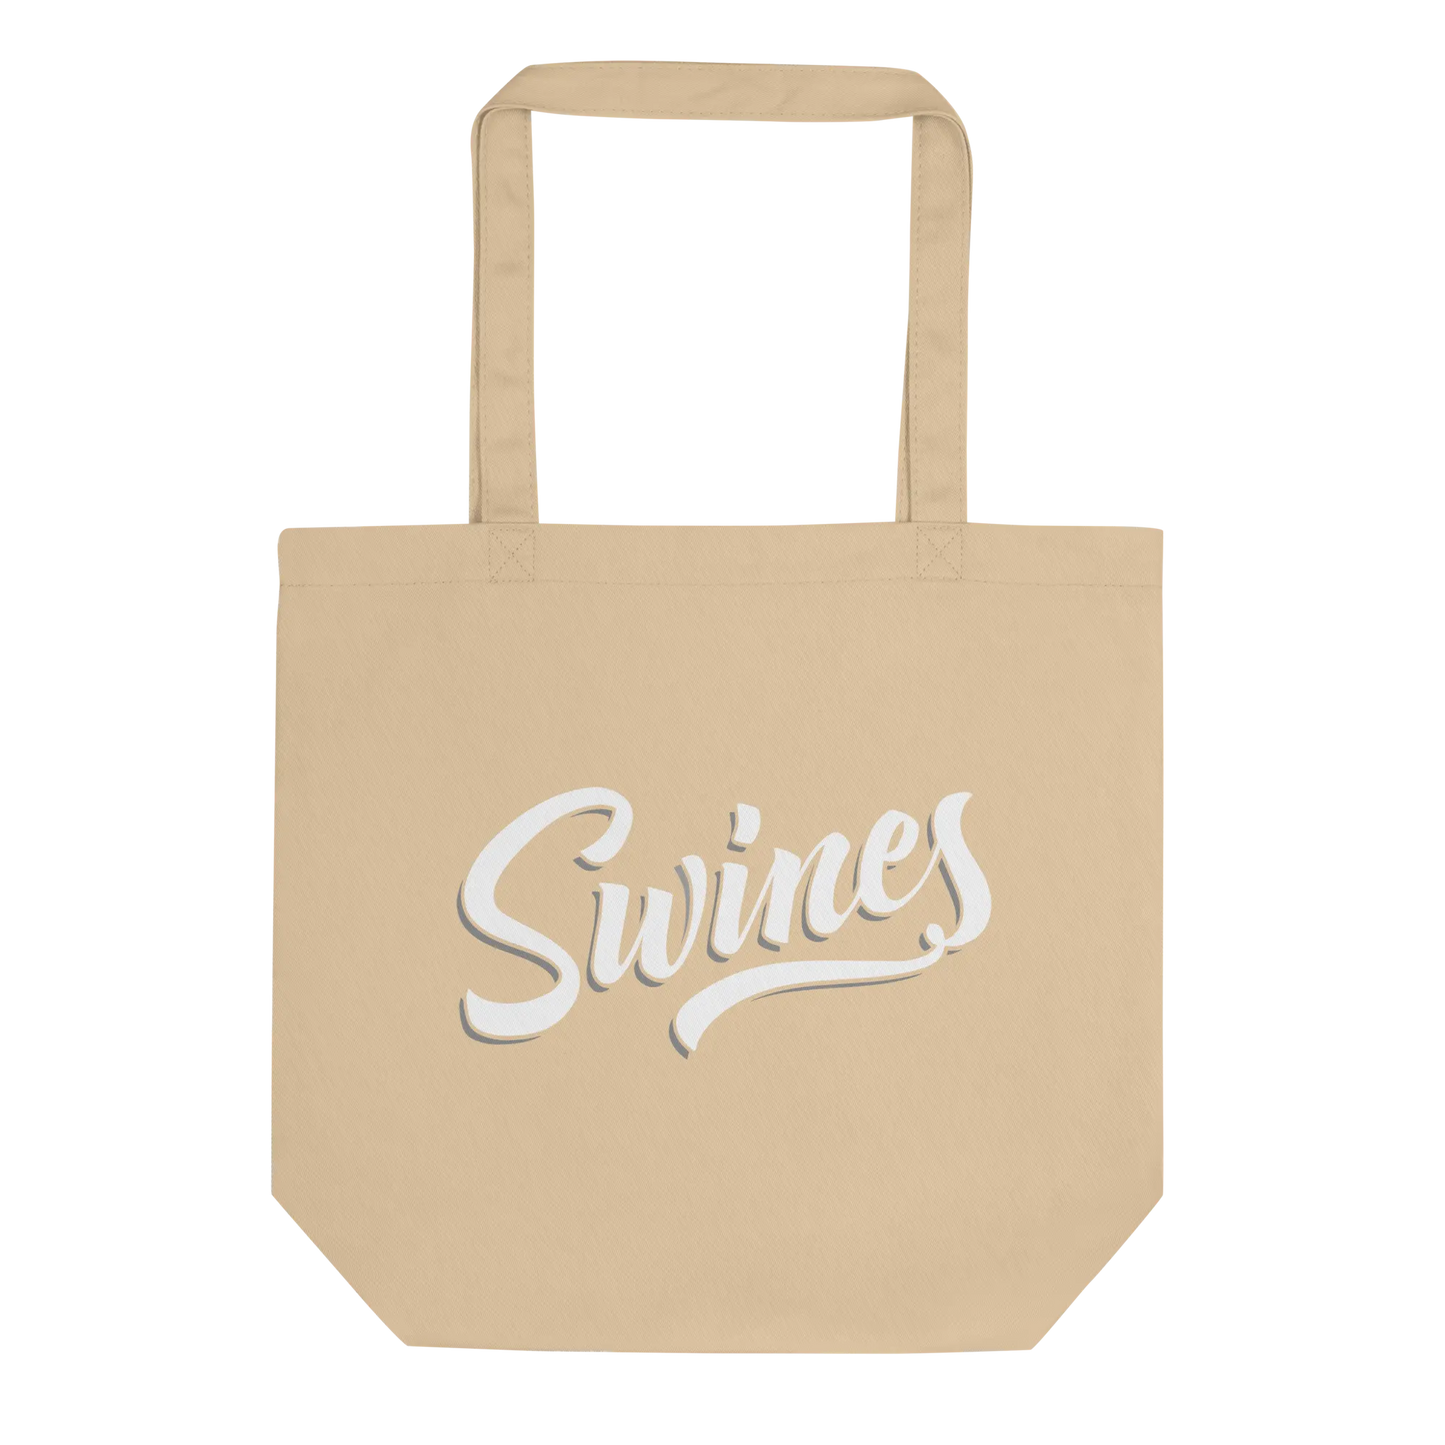 Foil Arms and Hog merchandise beige tote shopping bag with SWINES live show logo